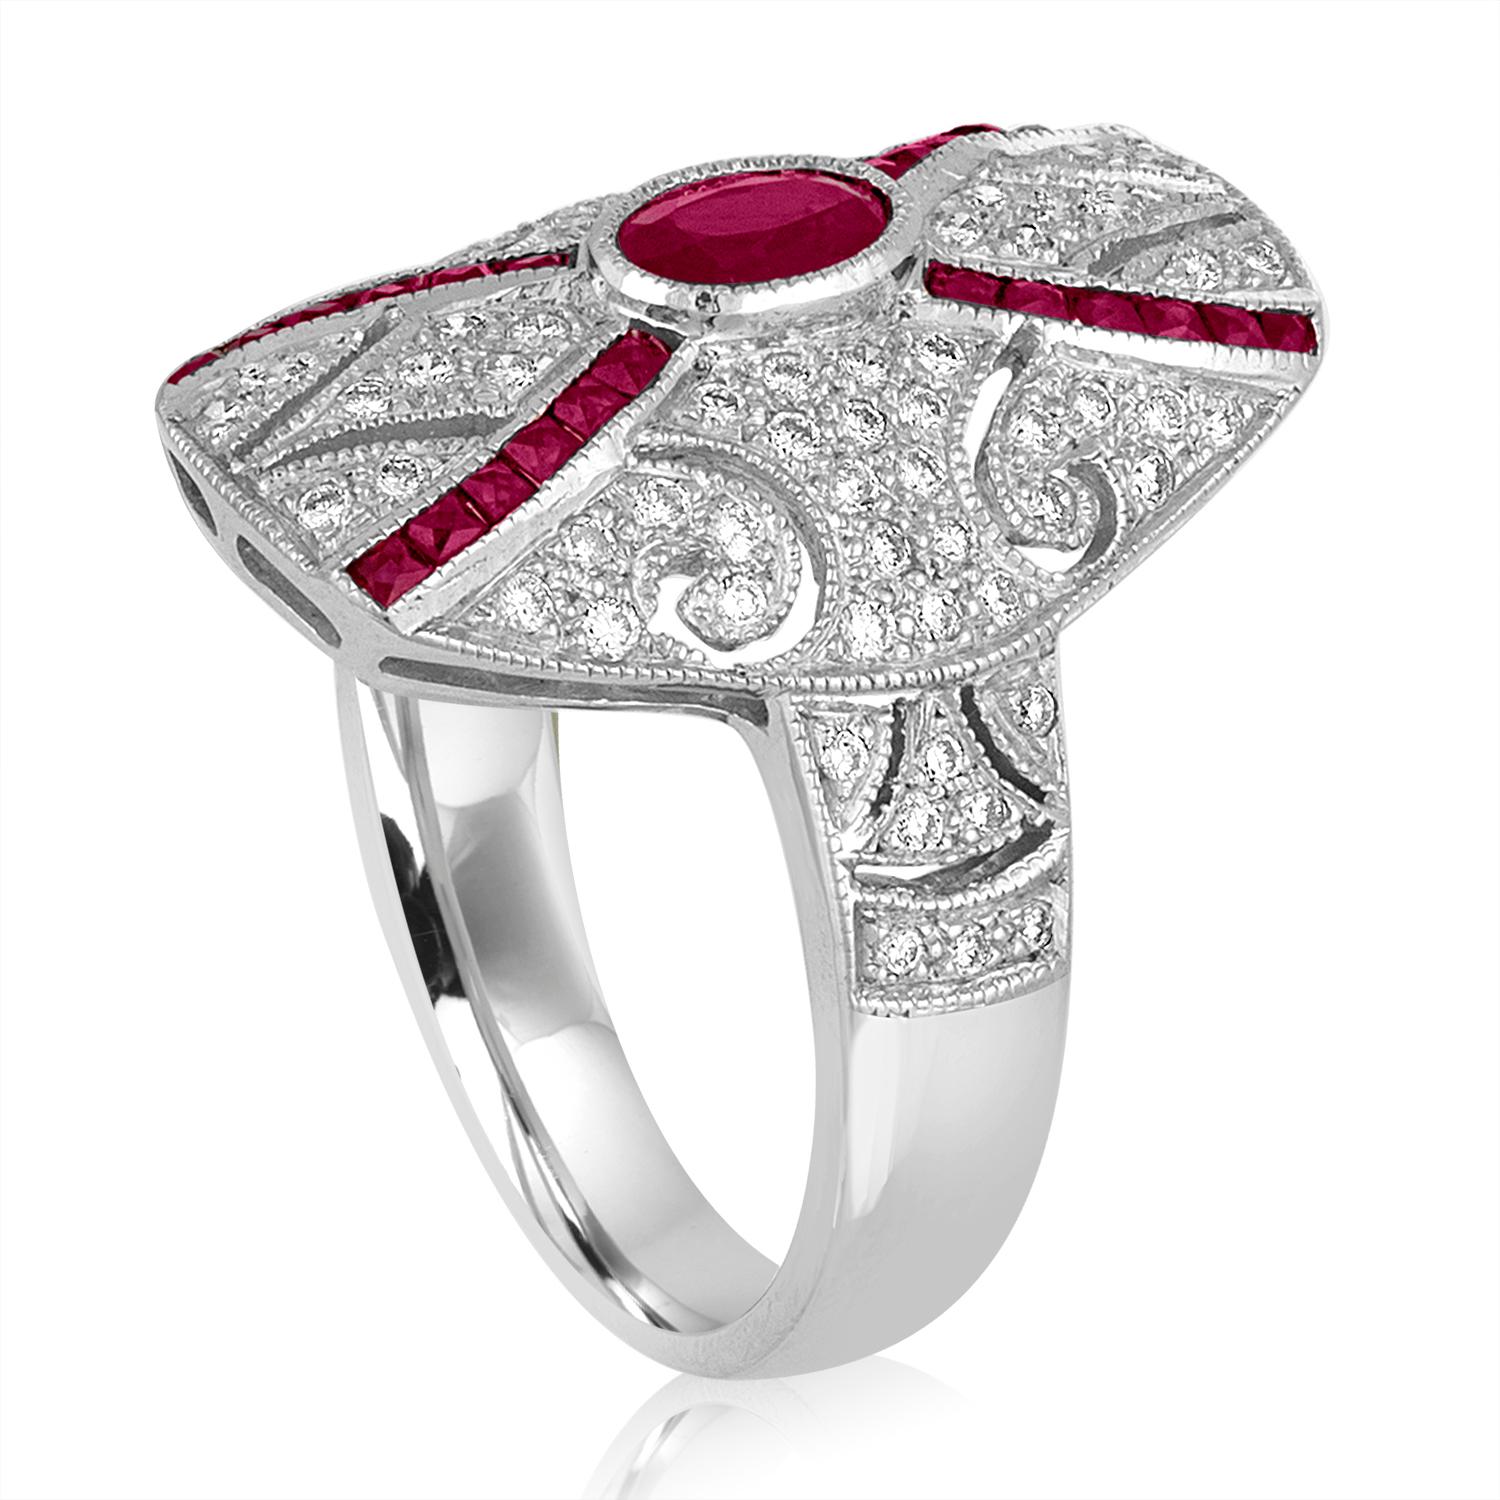 Art Deco Revival Style Ring
The ring is 18K White Gold
There are 0.55 Carats in Diamonds H SI
There are 1.55 Carats in Rubies
The ring is a size 6.75, sizable
The ring weighs 7.0 grams